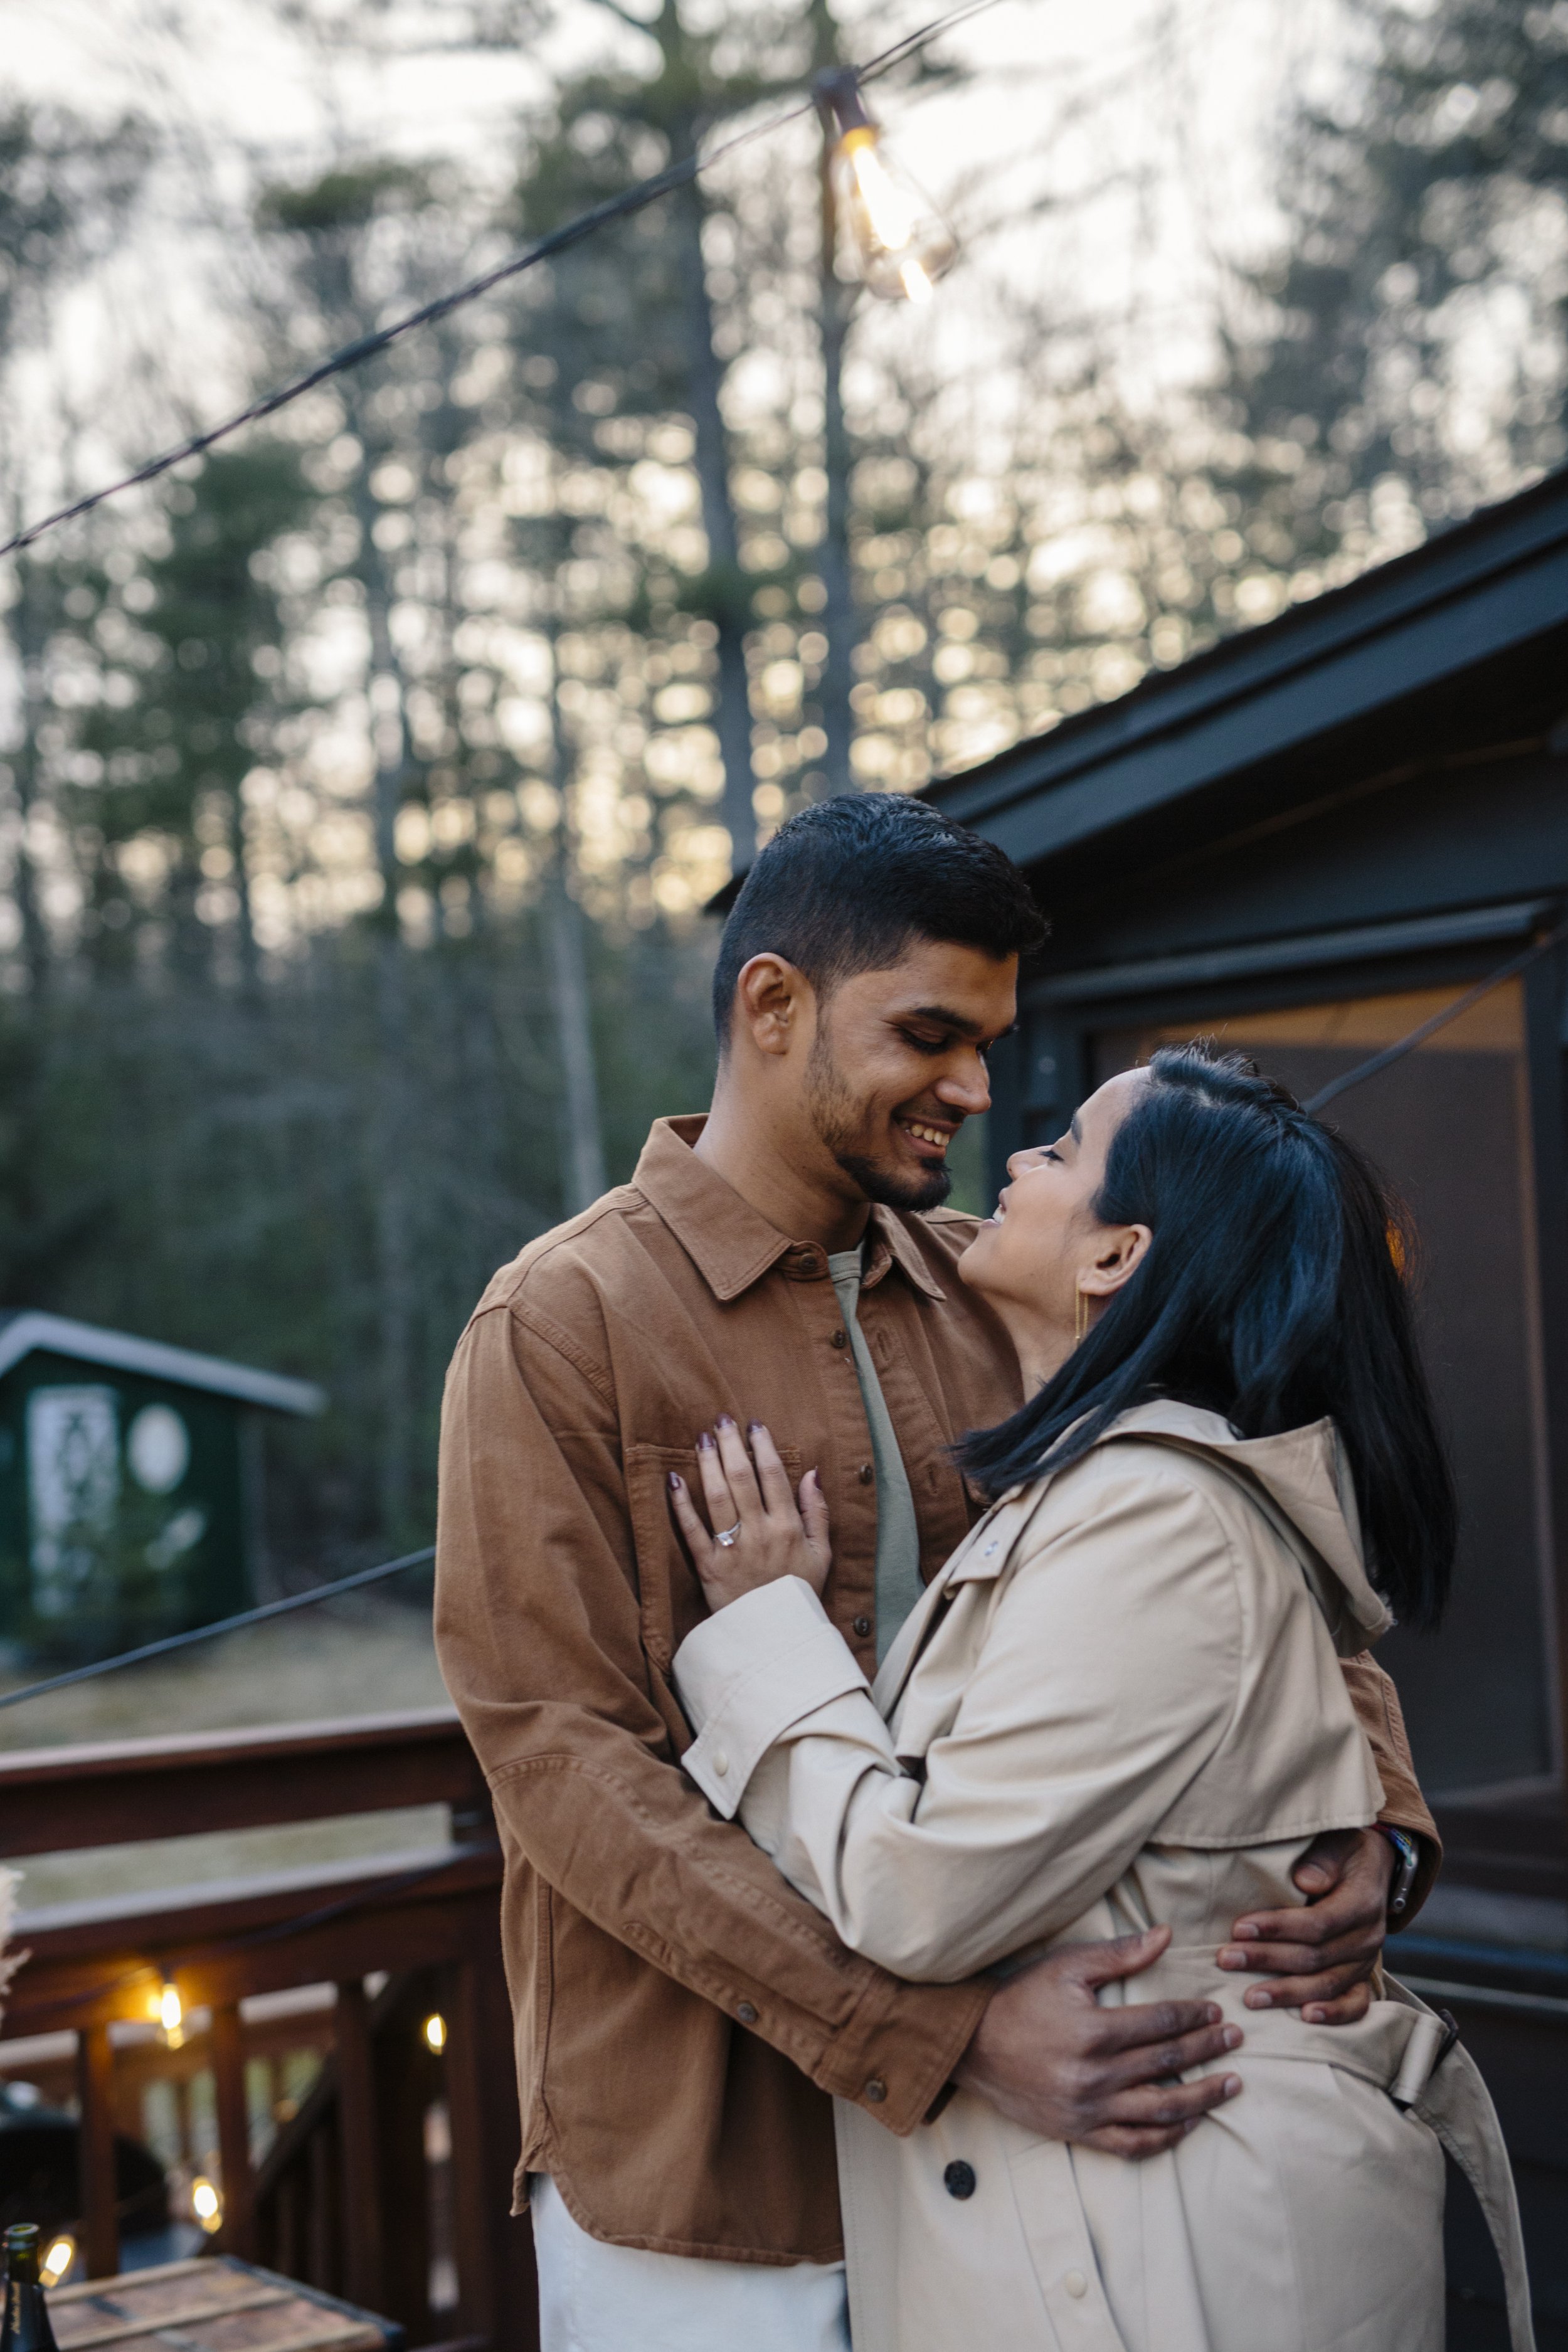 Saugerties-NY-Cabin-Proposal-Jenn-Morse-Wedding-Collective-By-Erin-128.jpg